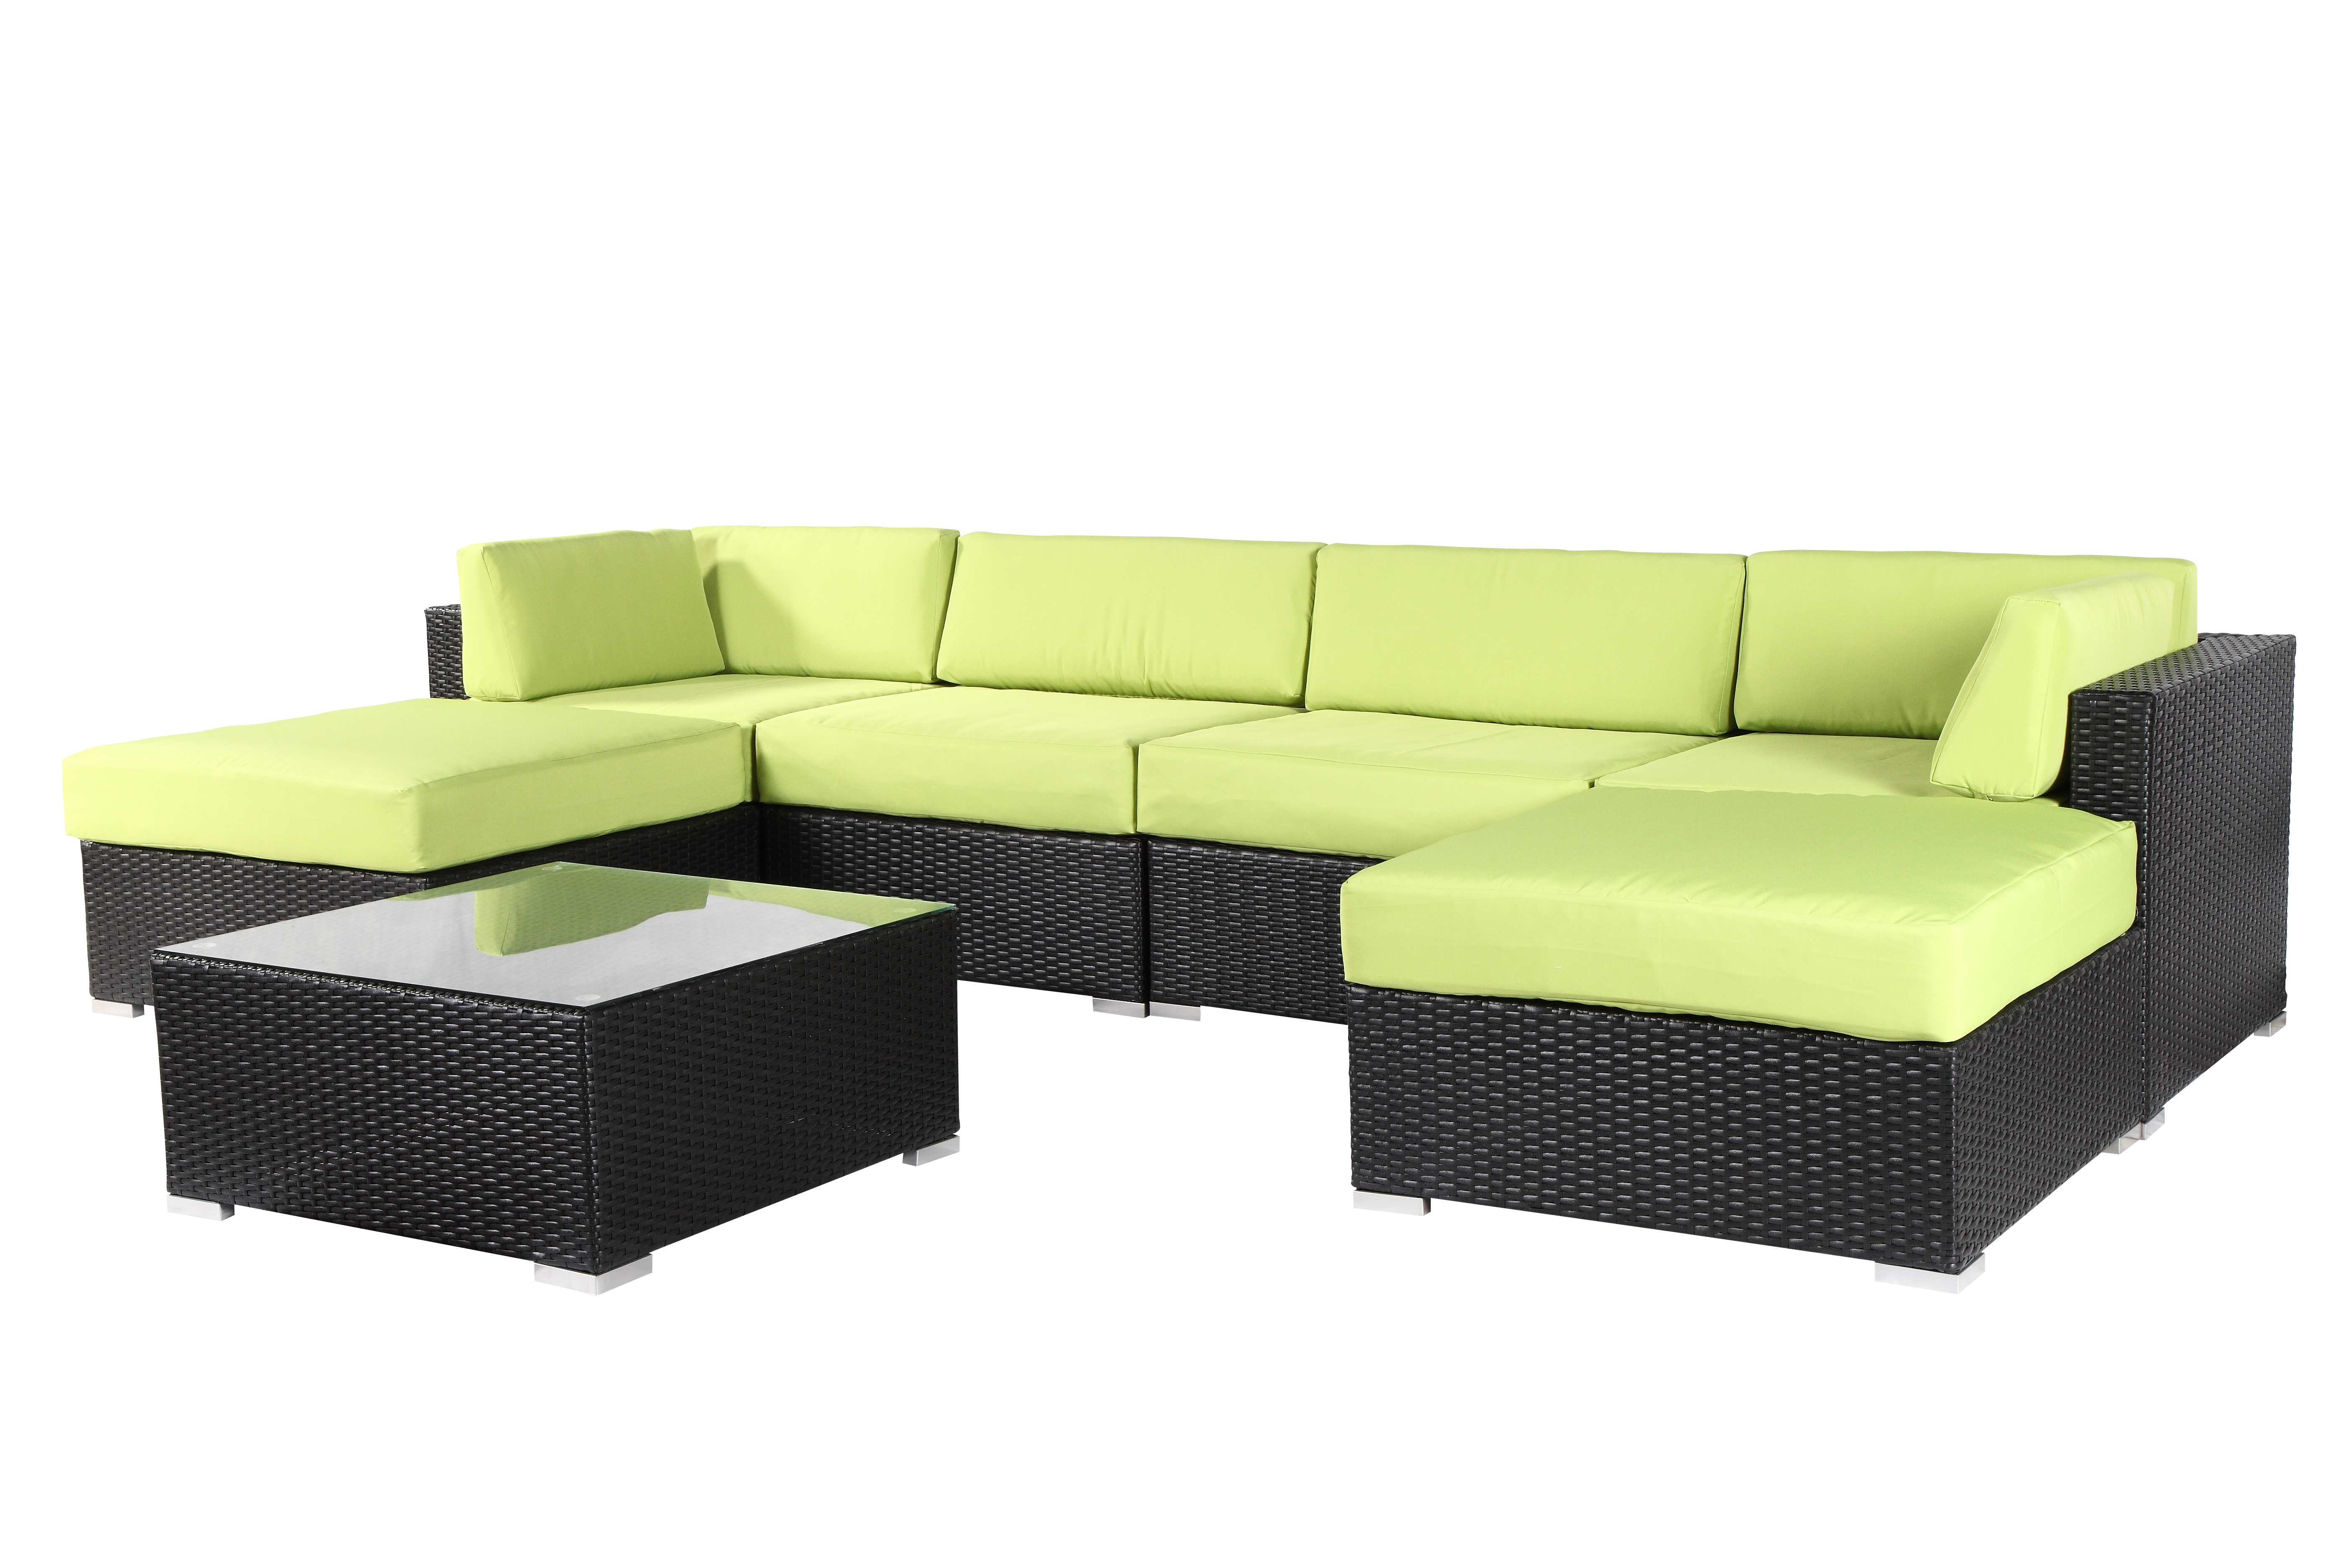 Popular Outdoor Rattan Sofa set for garden high quality and reasonable